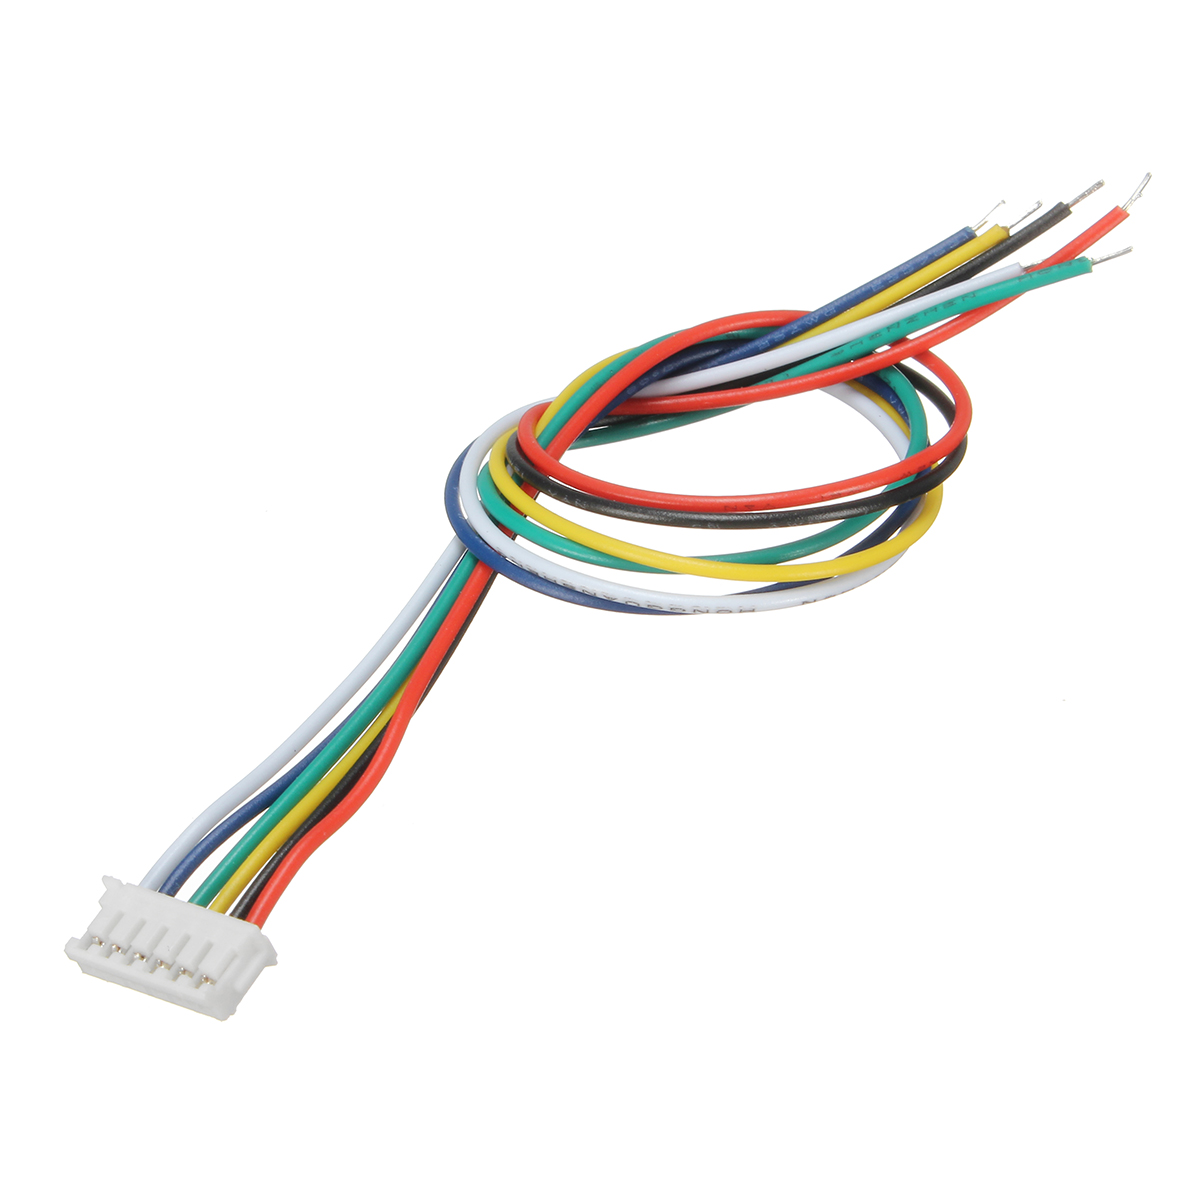 Excellwayreg-Mini-Micro-JST-15mm-ZH-6-Pin-Connector-Plug-and-Wires-Cables-15cm-10-Set-1170230-3